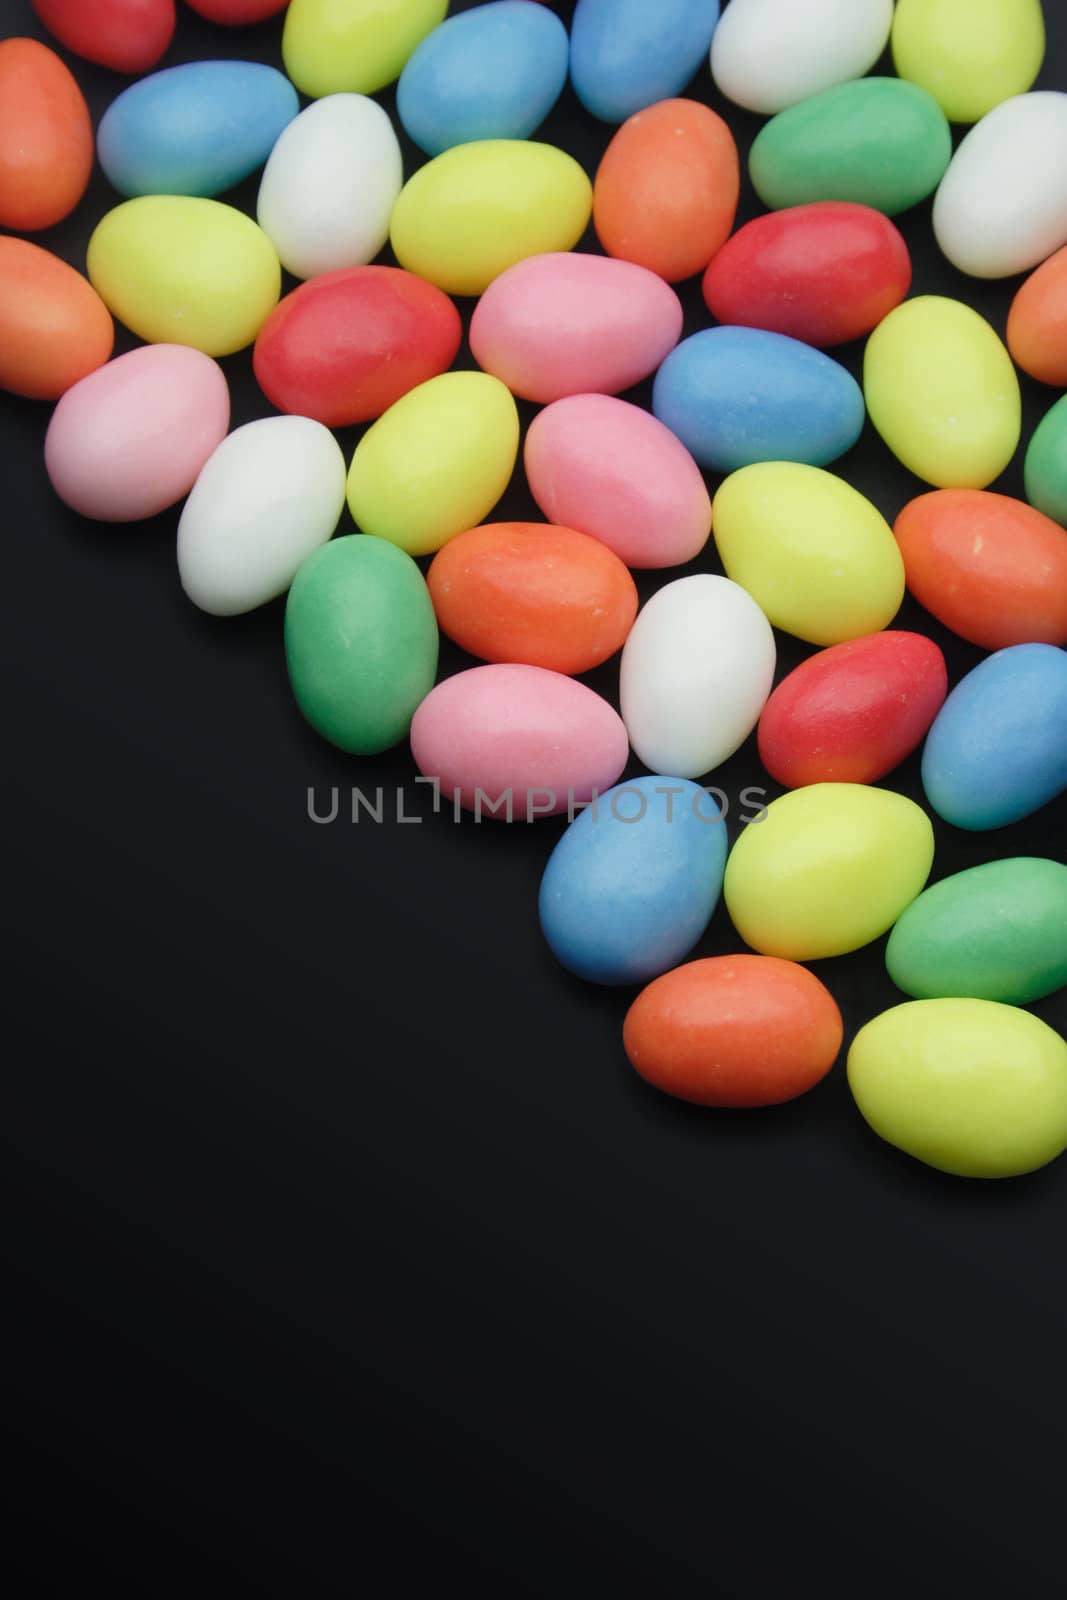 Very colourful sweets on a black surface. The candies are egg-shaped, but that should not limit the use to easter-topics only.